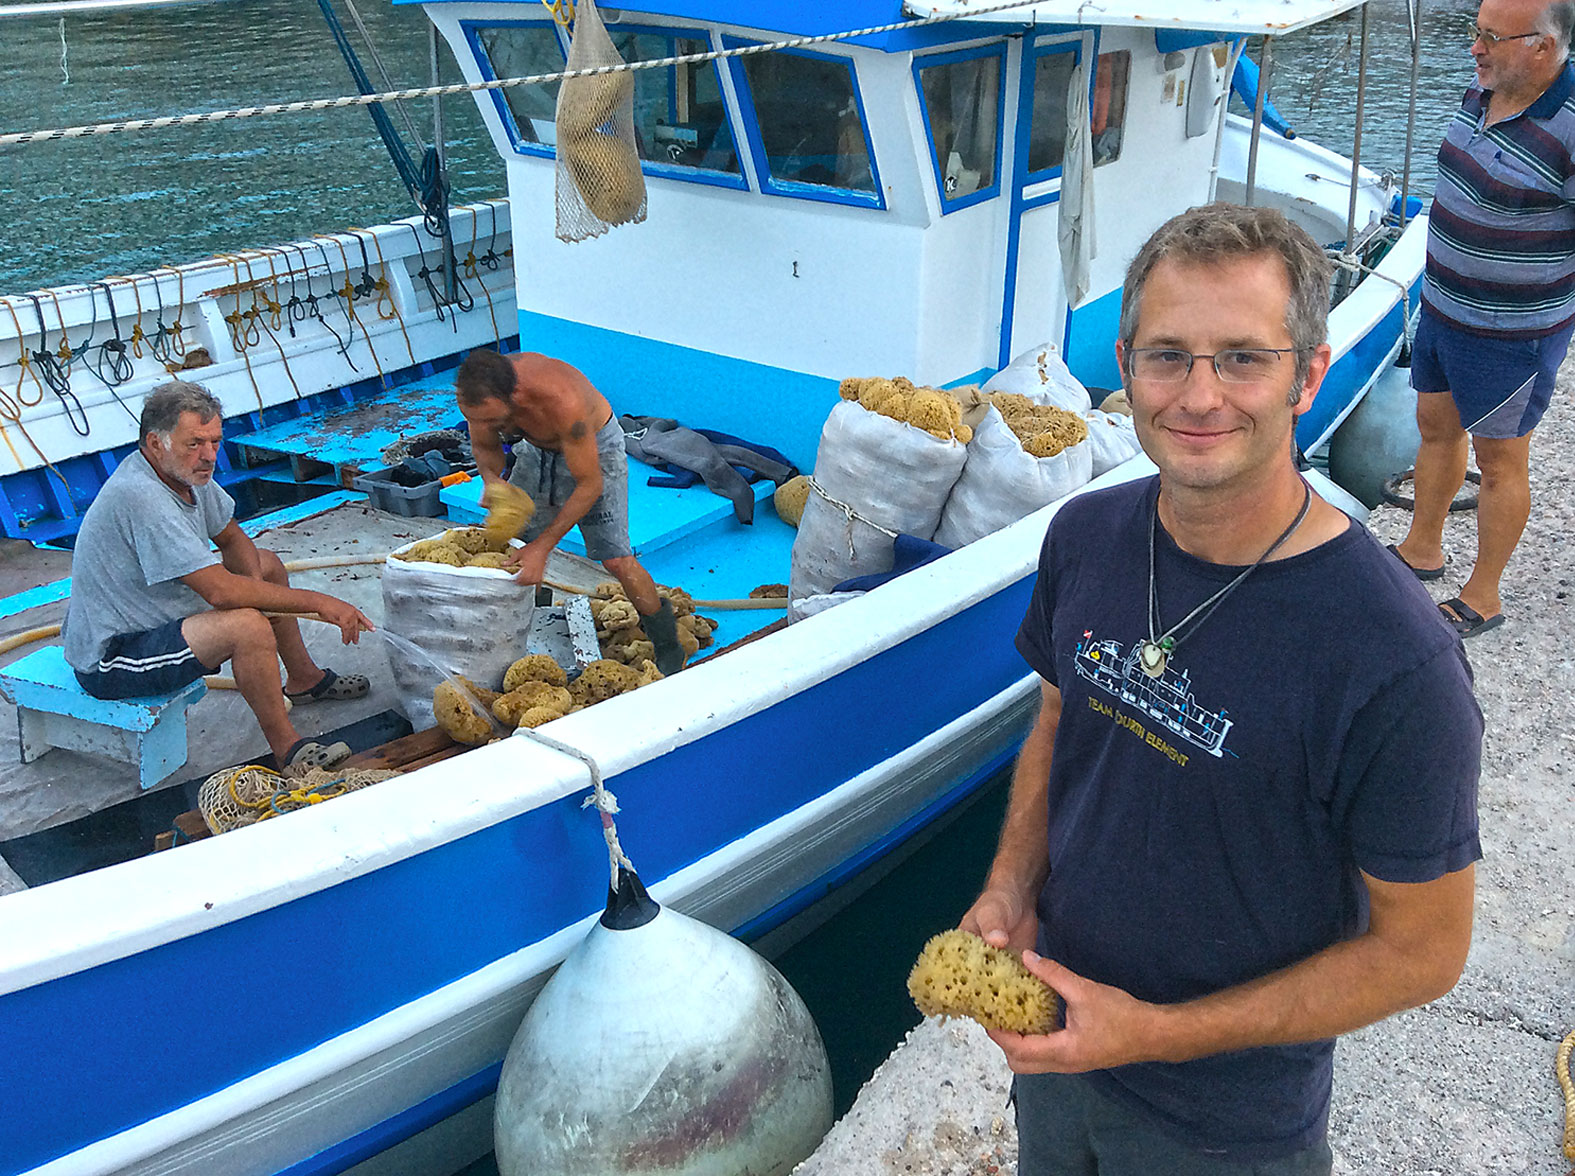 The whole dive team was excited about sponge diving techniques of the past. Here's Evan Kovacs with a locally harvested sponge to take back to the USA as a present.